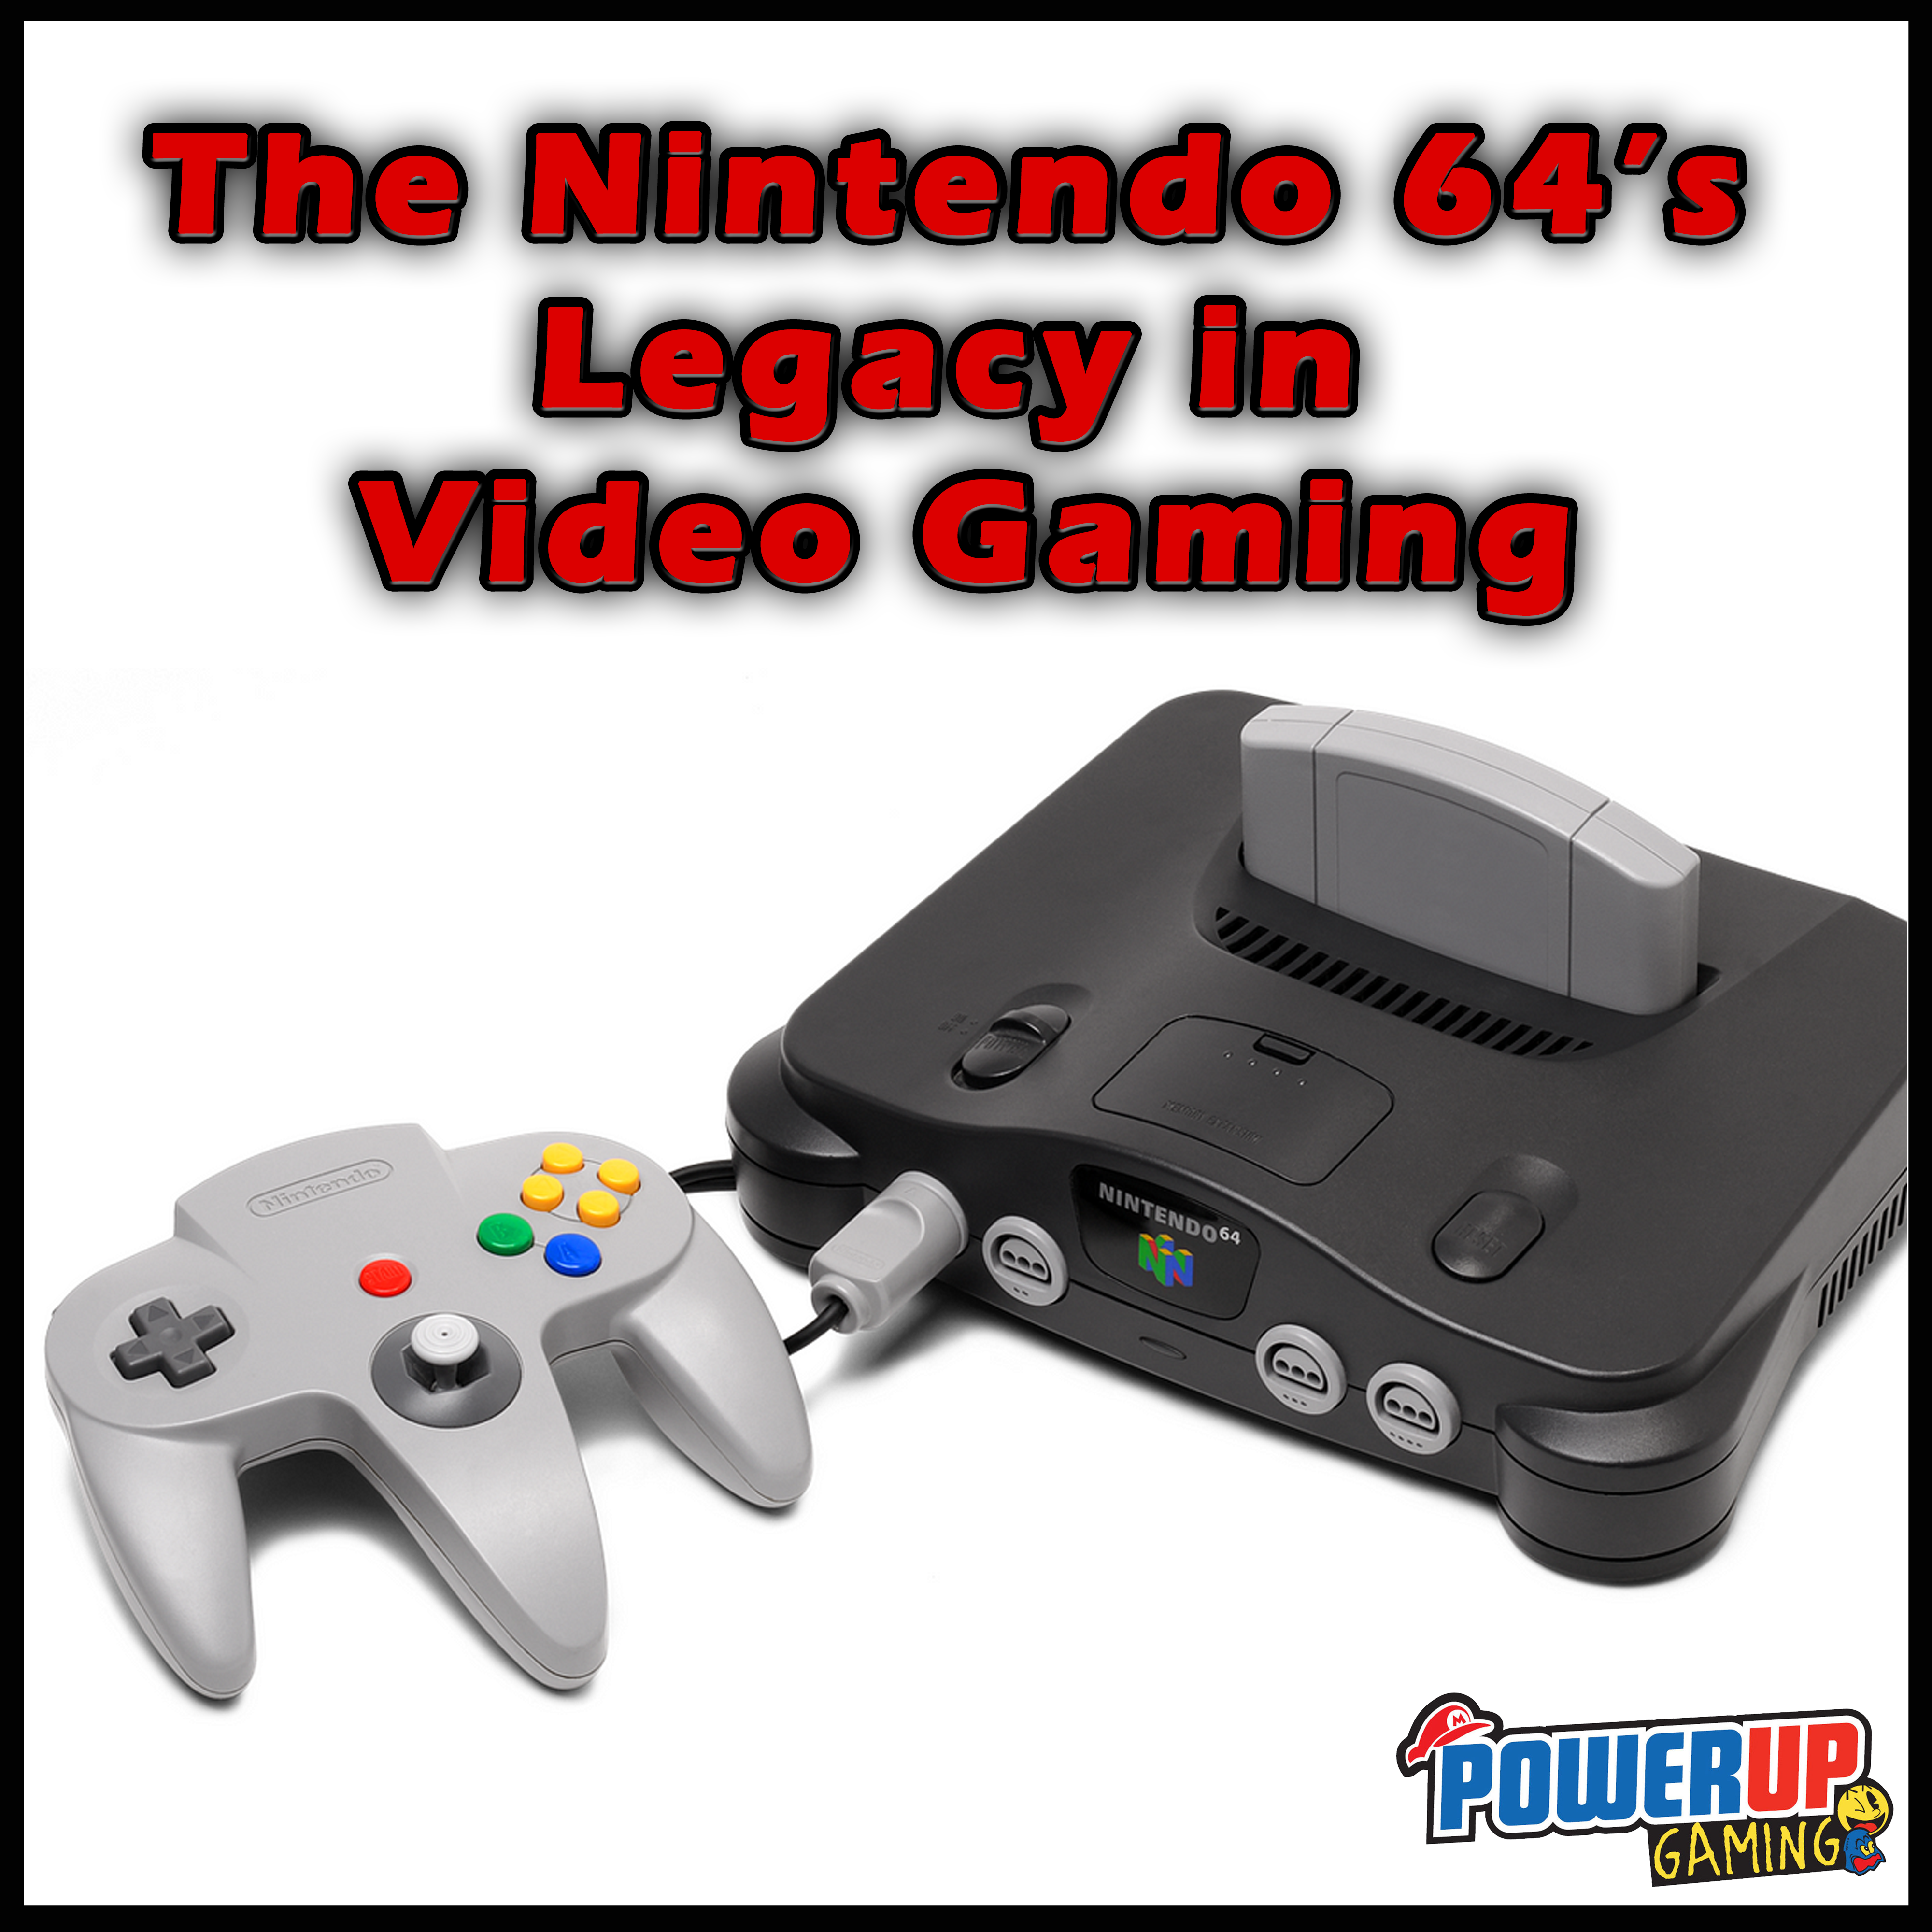 The Nintendo 64's Legacy in Video Gaming